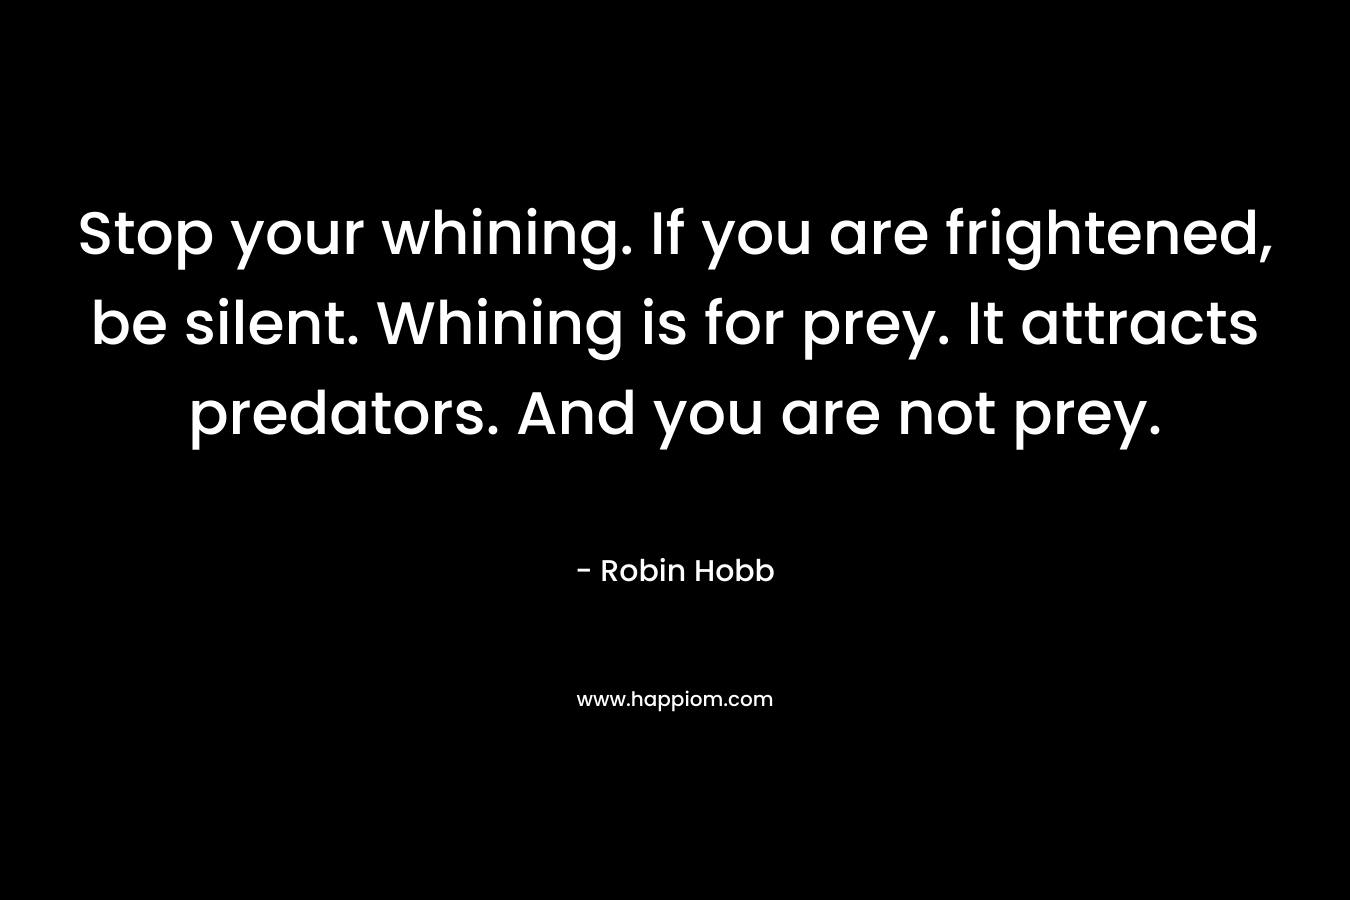 Stop your whining. If you are frightened, be silent. Whining is for prey. It attracts predators. And you are not prey. – Robin Hobb